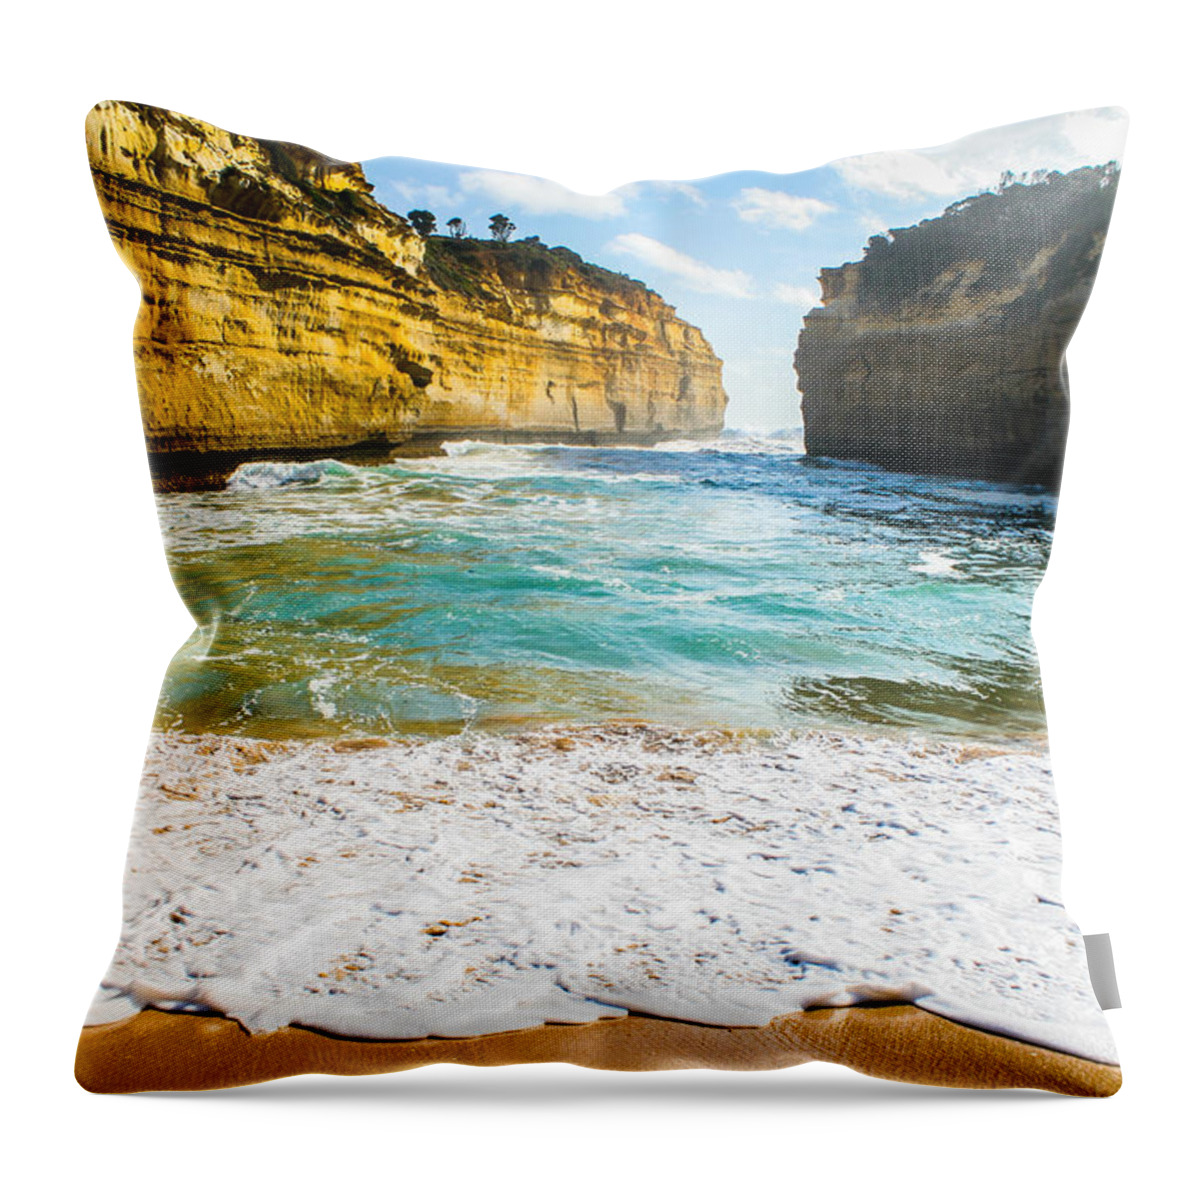 Waves Throw Pillow featuring the photograph Loch Ard Gorge by Max Serjeant